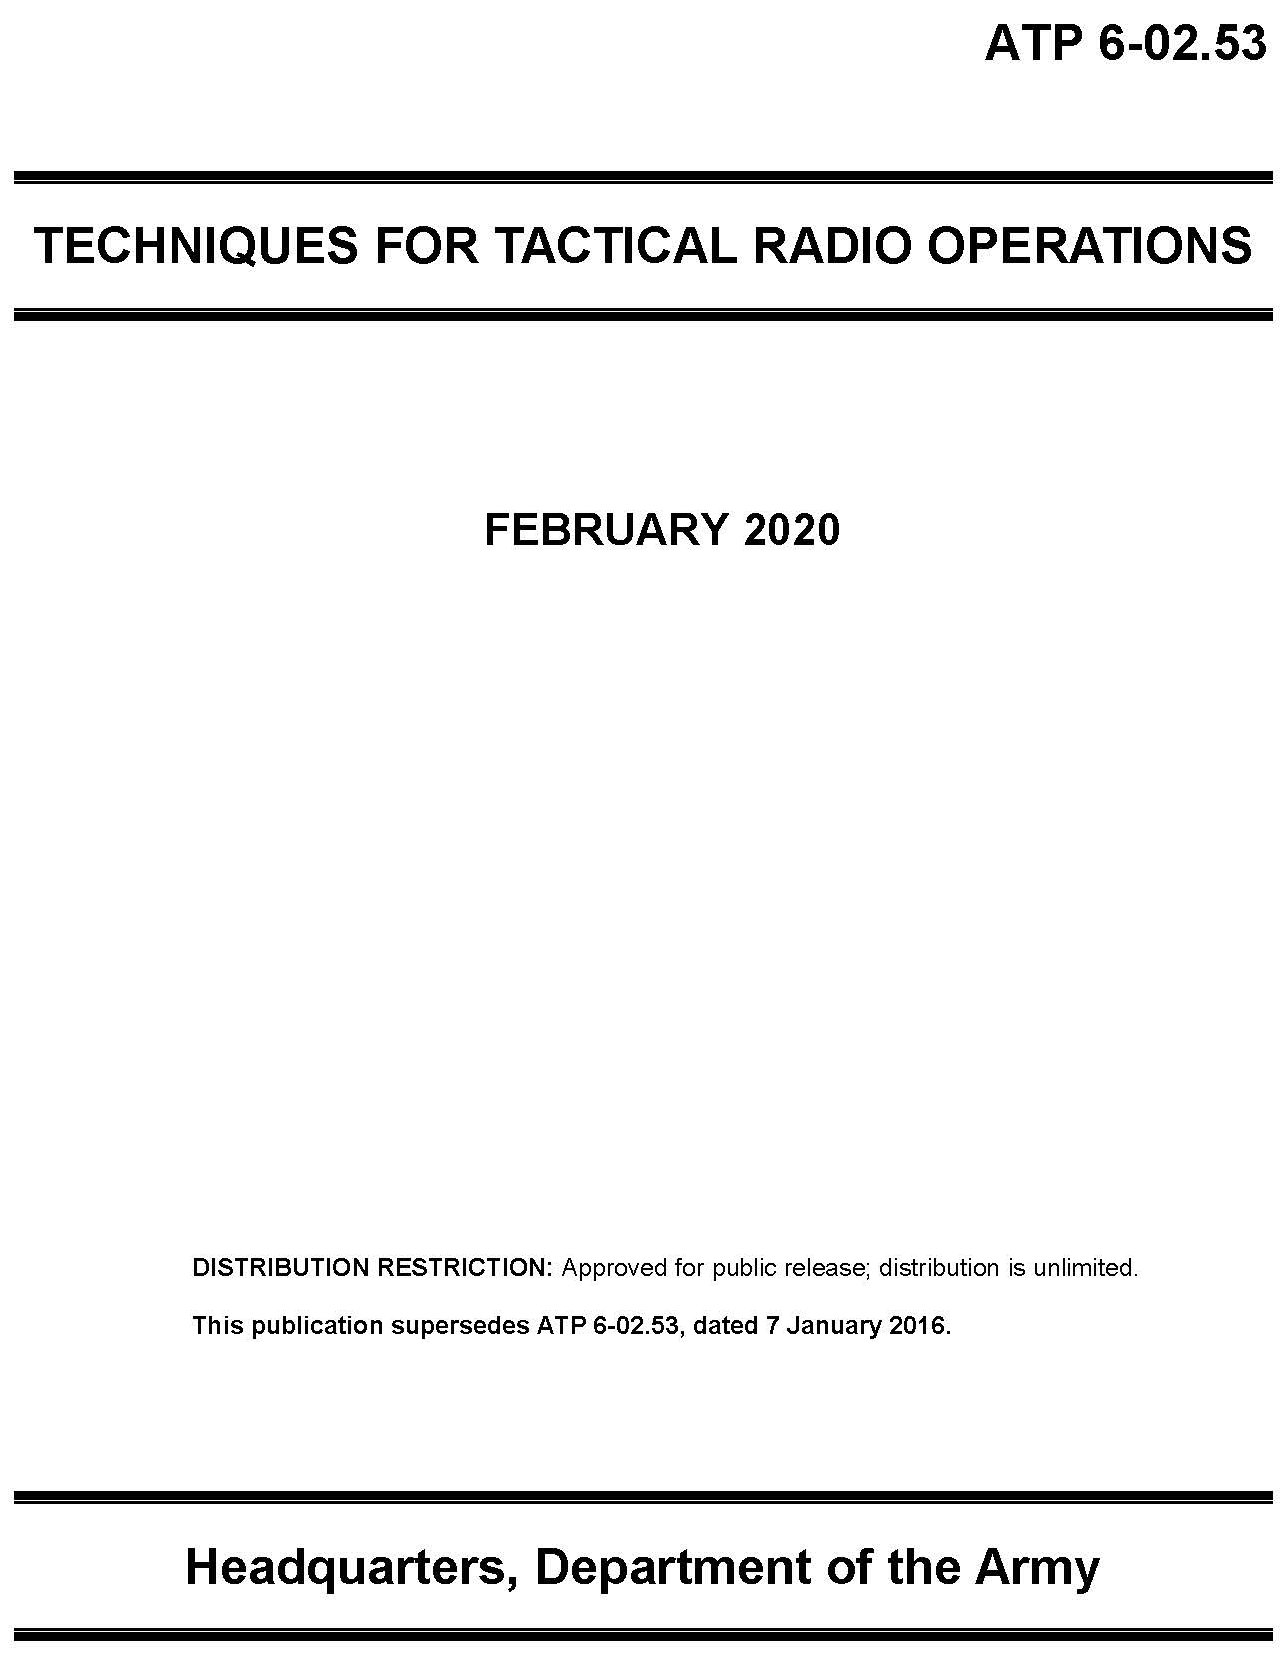 ATP 6-02.53 Techniques for Tactical Radio Opns - 2020 -mini size